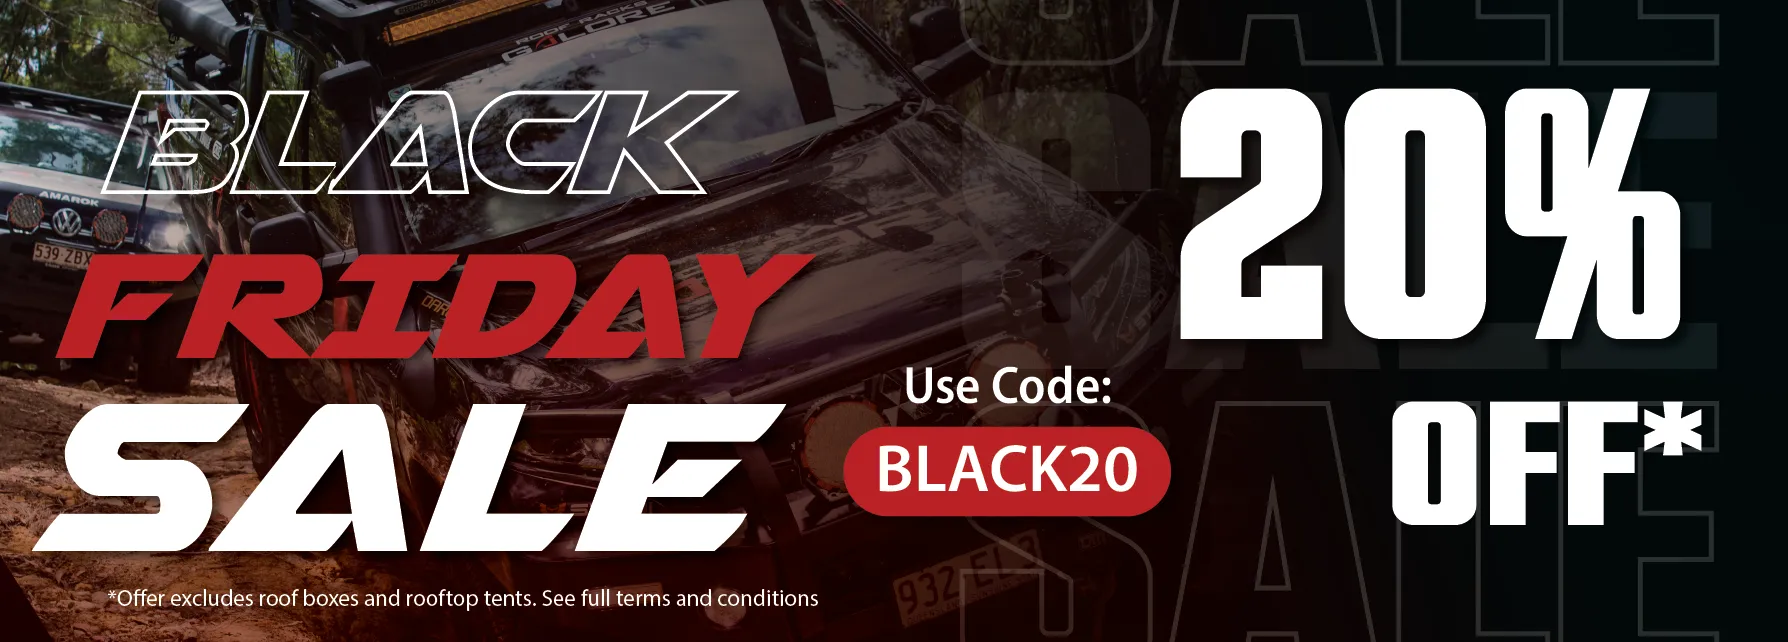 Black Friday 20% OFF SALE at Roof Racks Galore